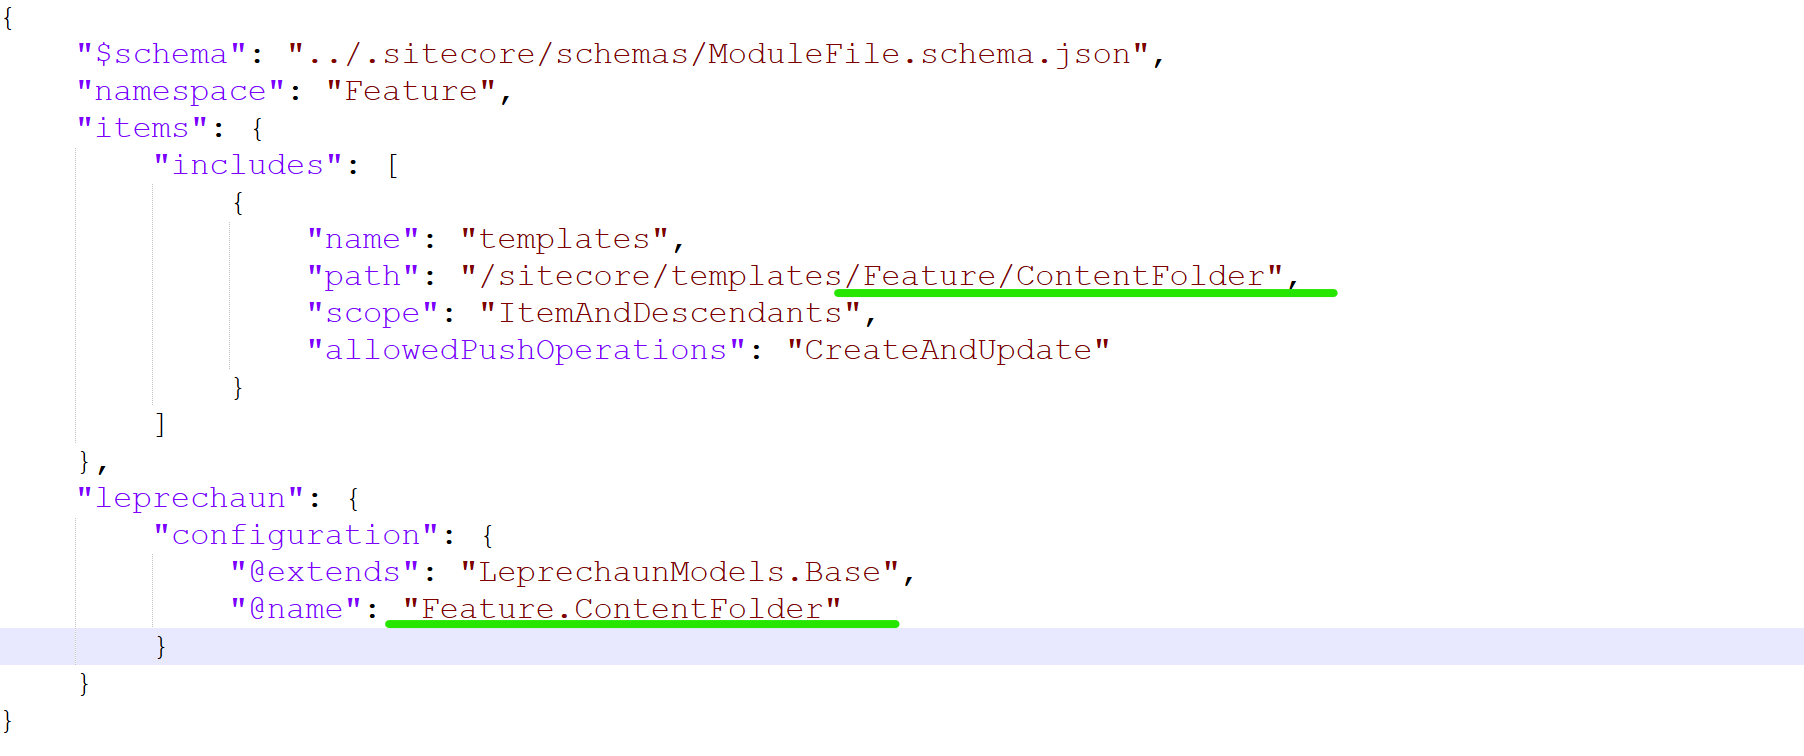 Detailed view of a JSON file focusing on the configuration path attributes within a module.